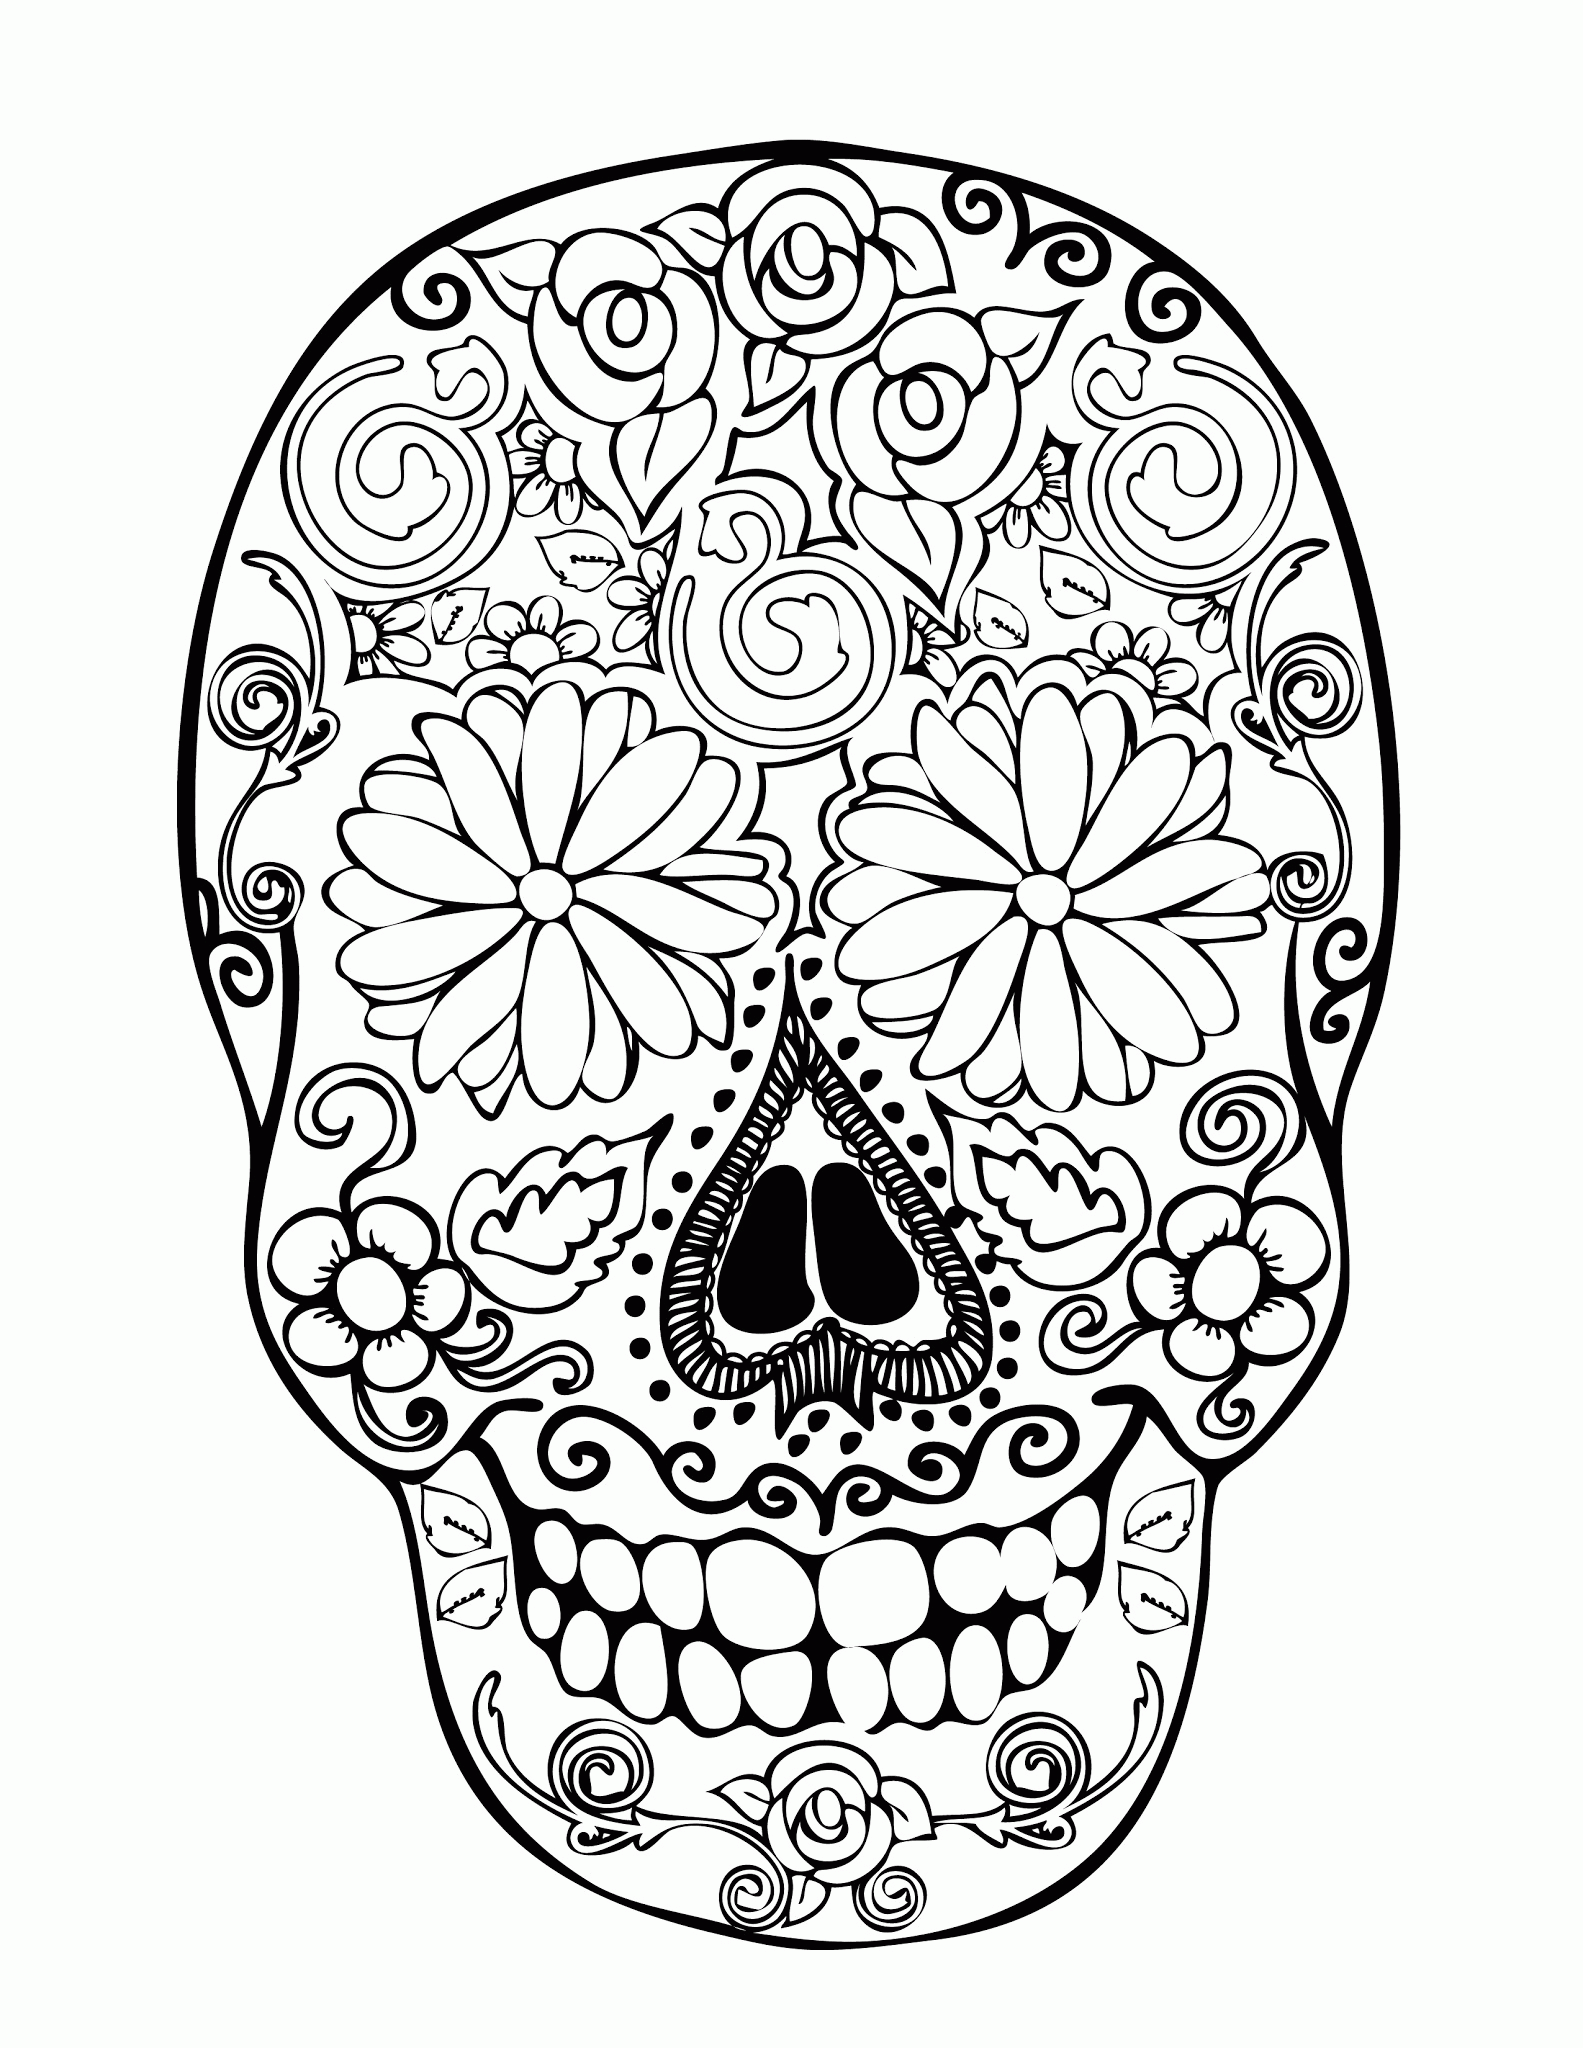 Easy Sugar Skull Coloring Pages - Coloring Home